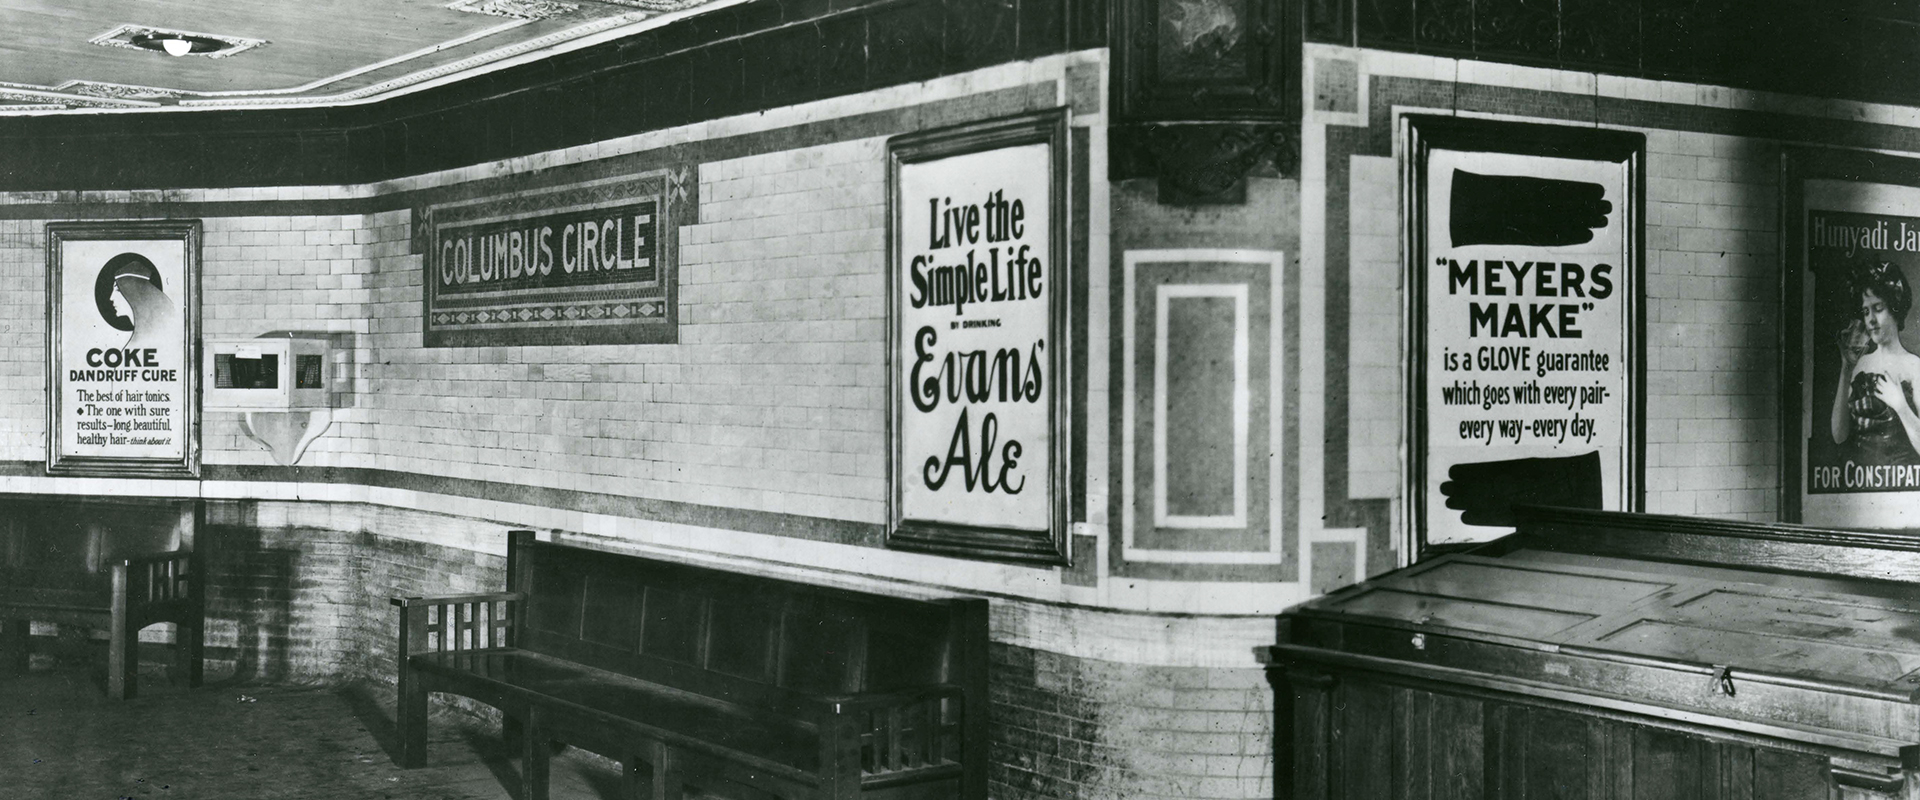 1904 photograph of Columbus Circle Station from the New York Transit Museum Collection